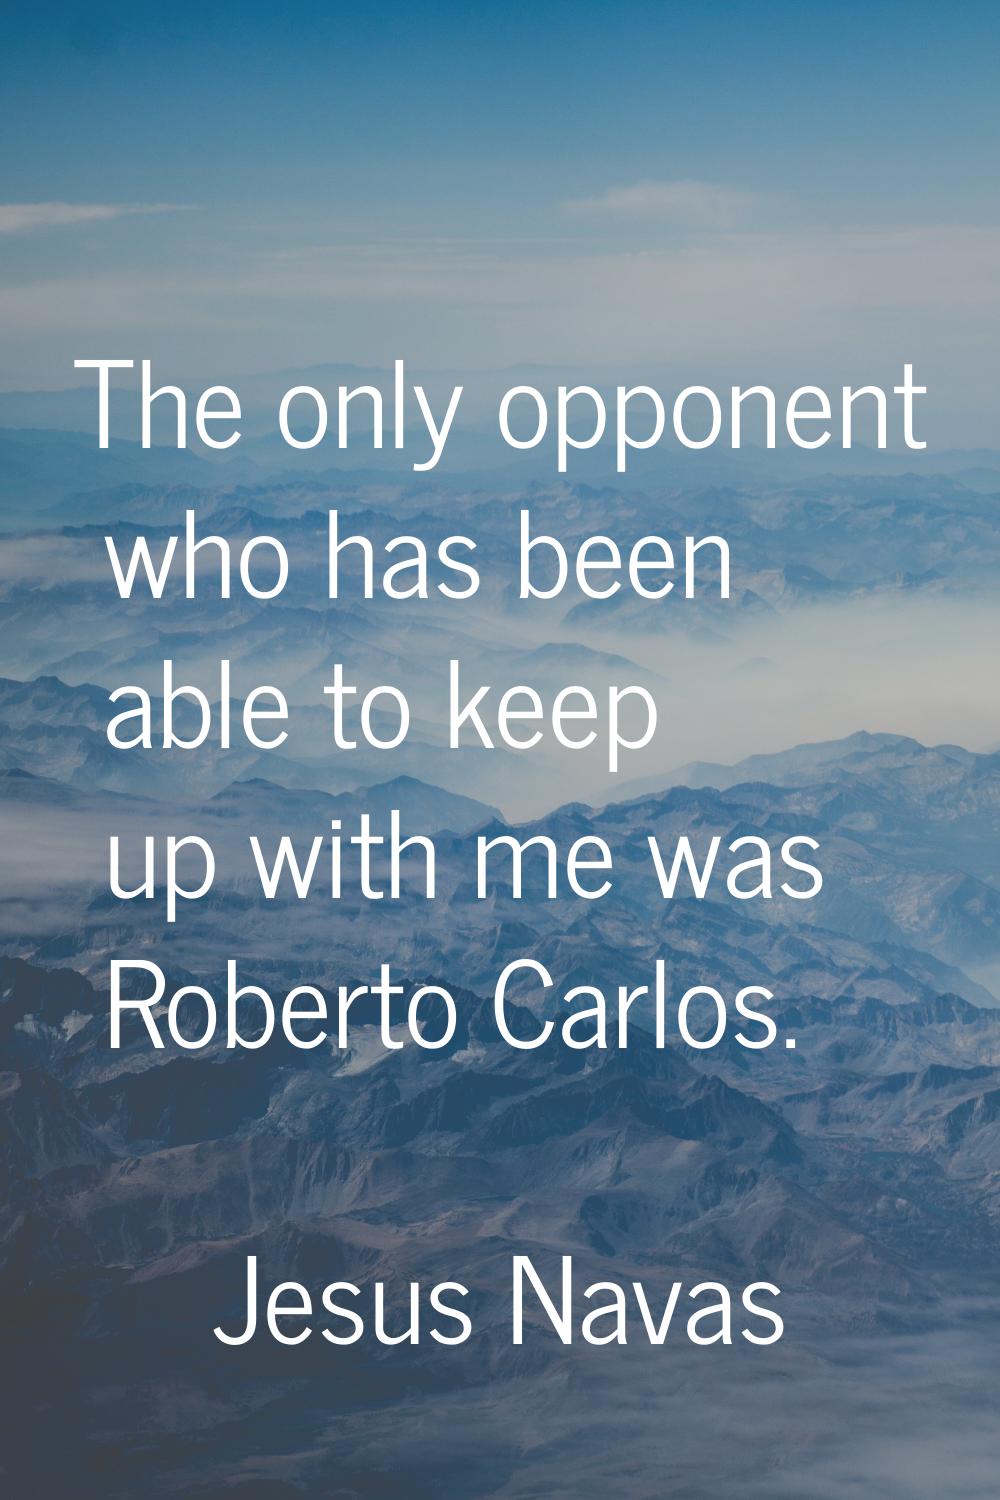 The only opponent who has been able to keep up with me was Roberto Carlos.